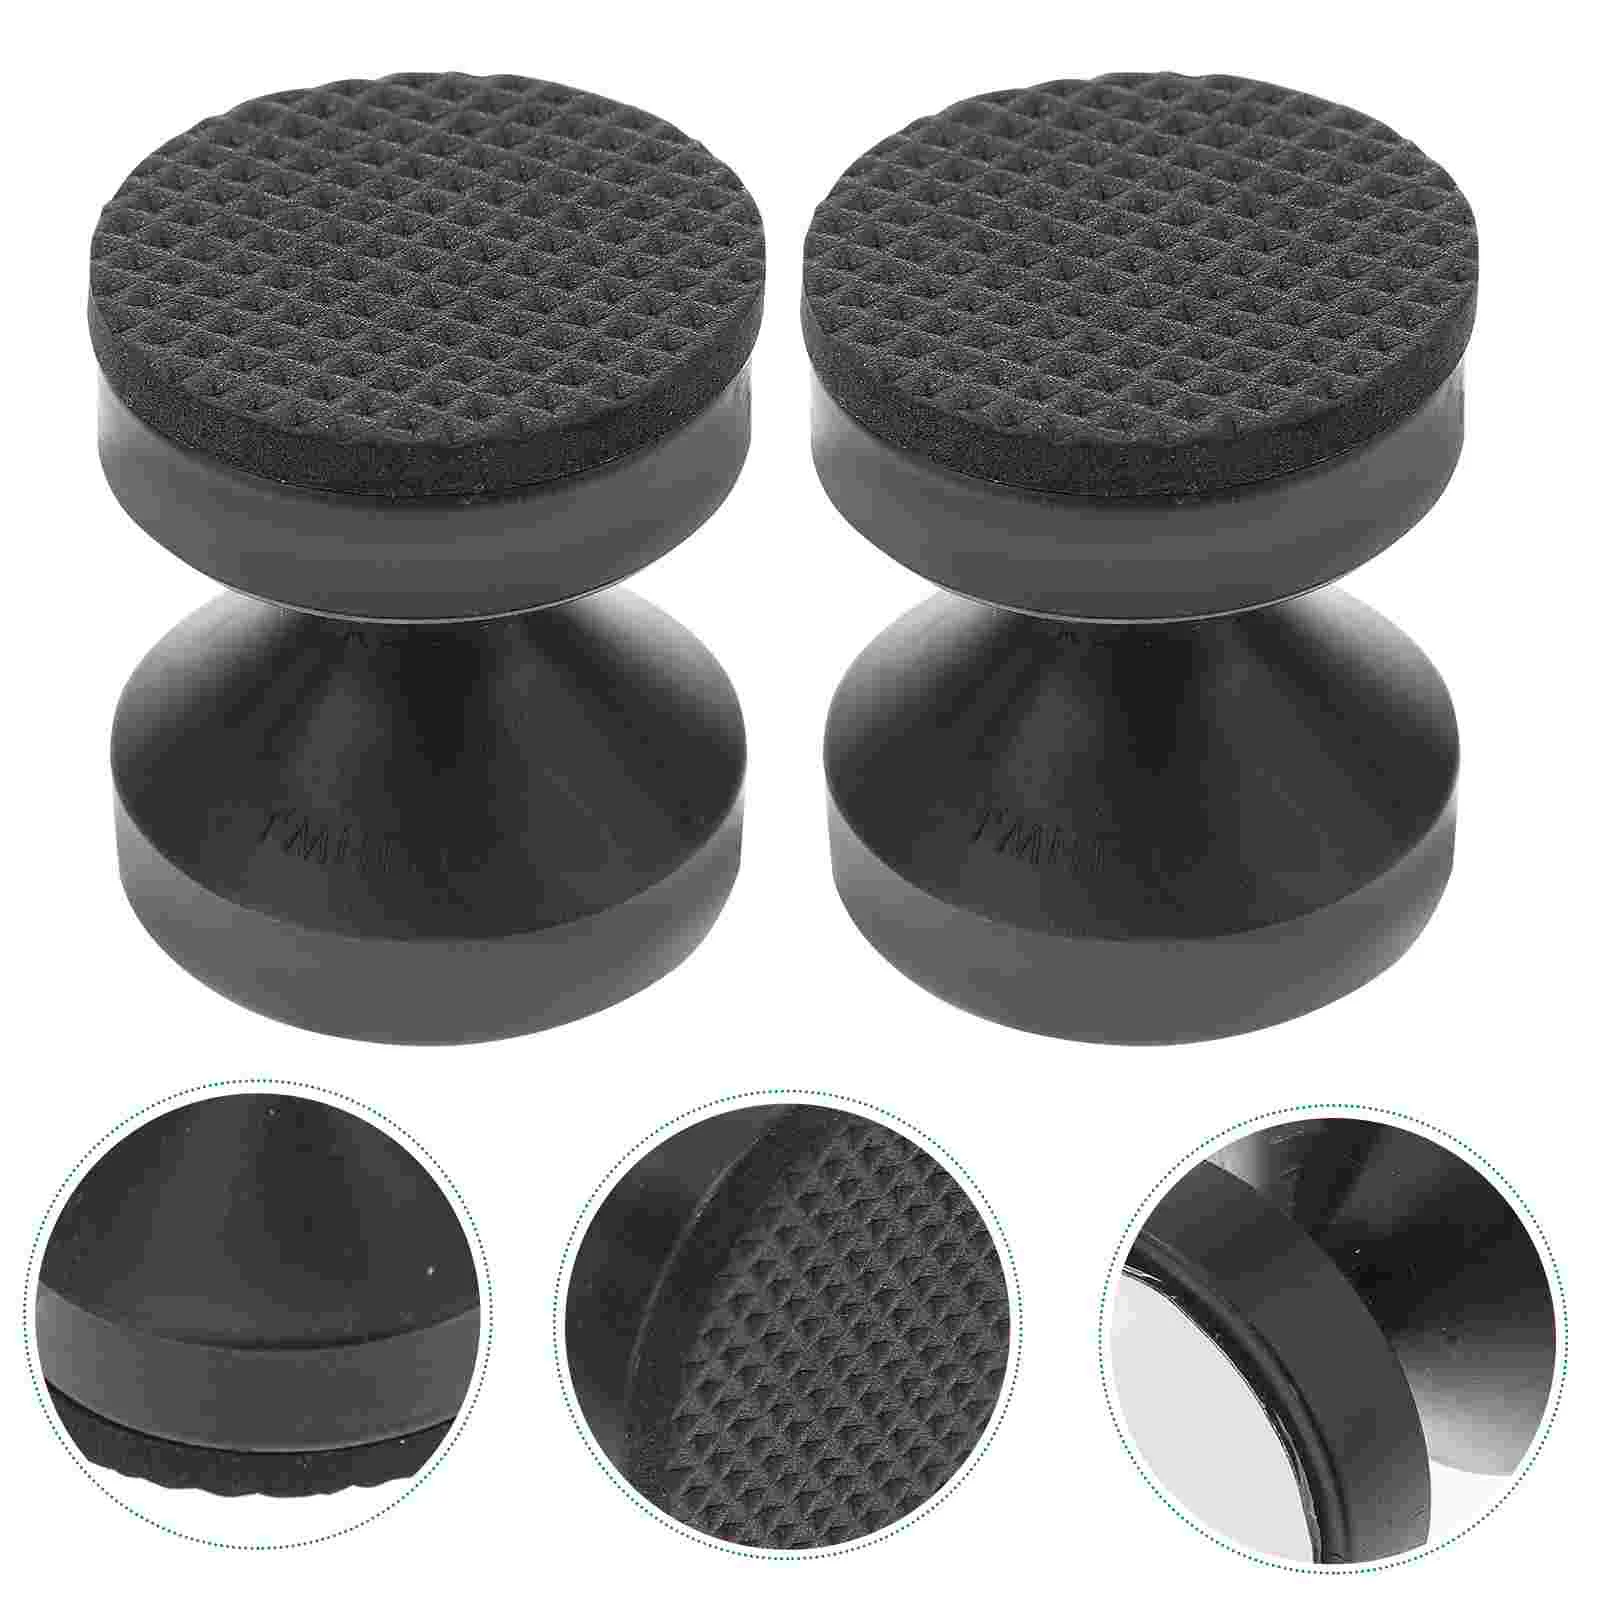 

4 Pcs Furniture Fall Preventer Headboards Adjustable Bed Brackets Wall Stopper Frame Noise Plastic Spacer Stoppers for Bumpers